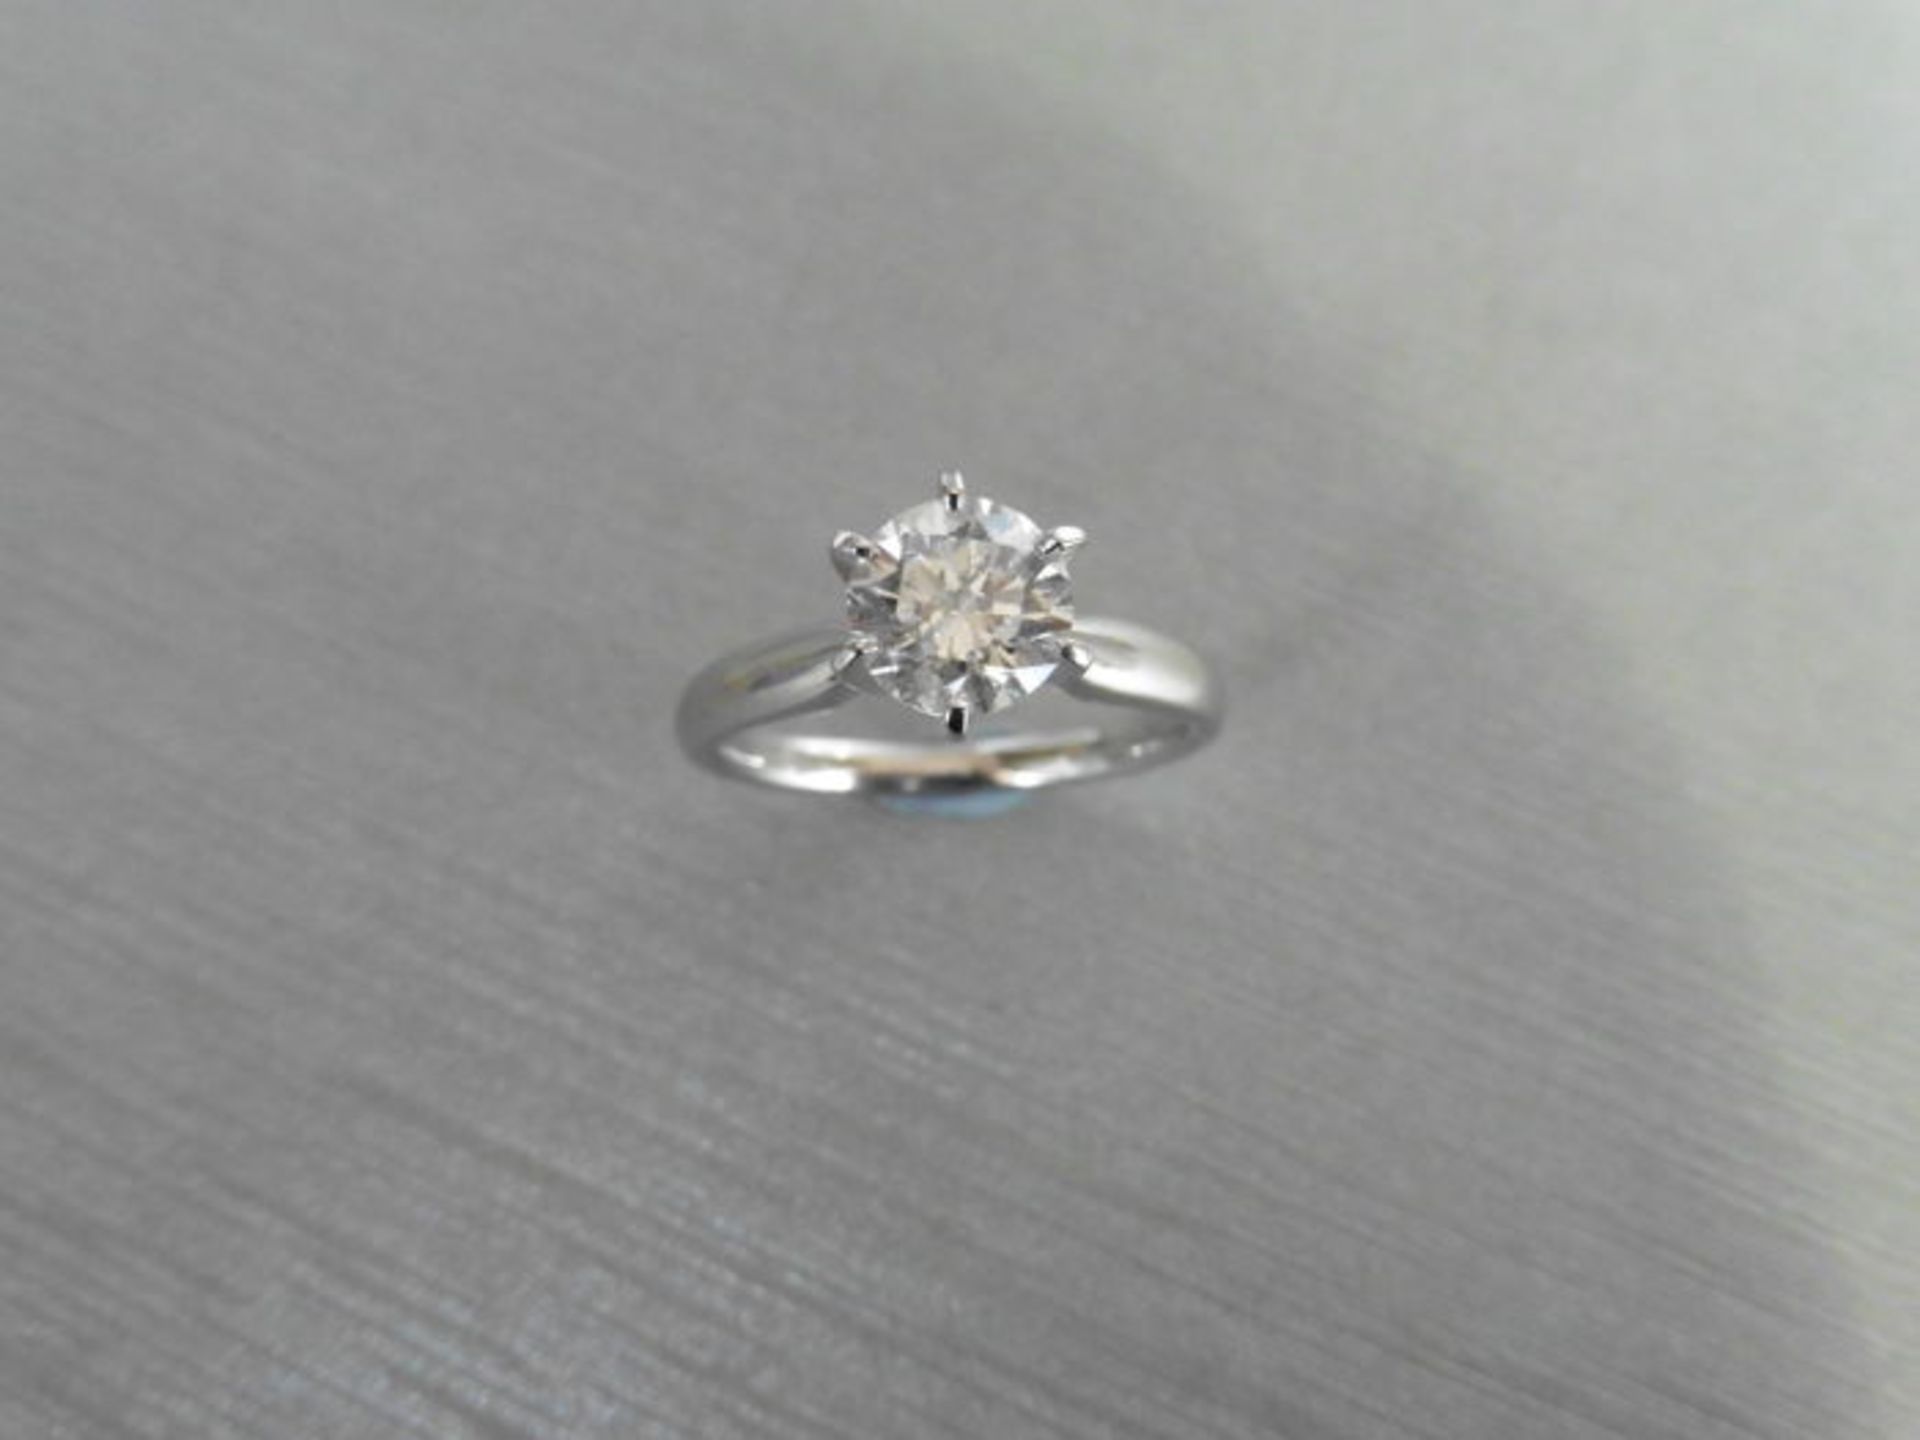 1.05ct Diamond solitaire ring with a brilliant cut diamond, J colour and Si1 clarity. Set in - Image 4 of 4